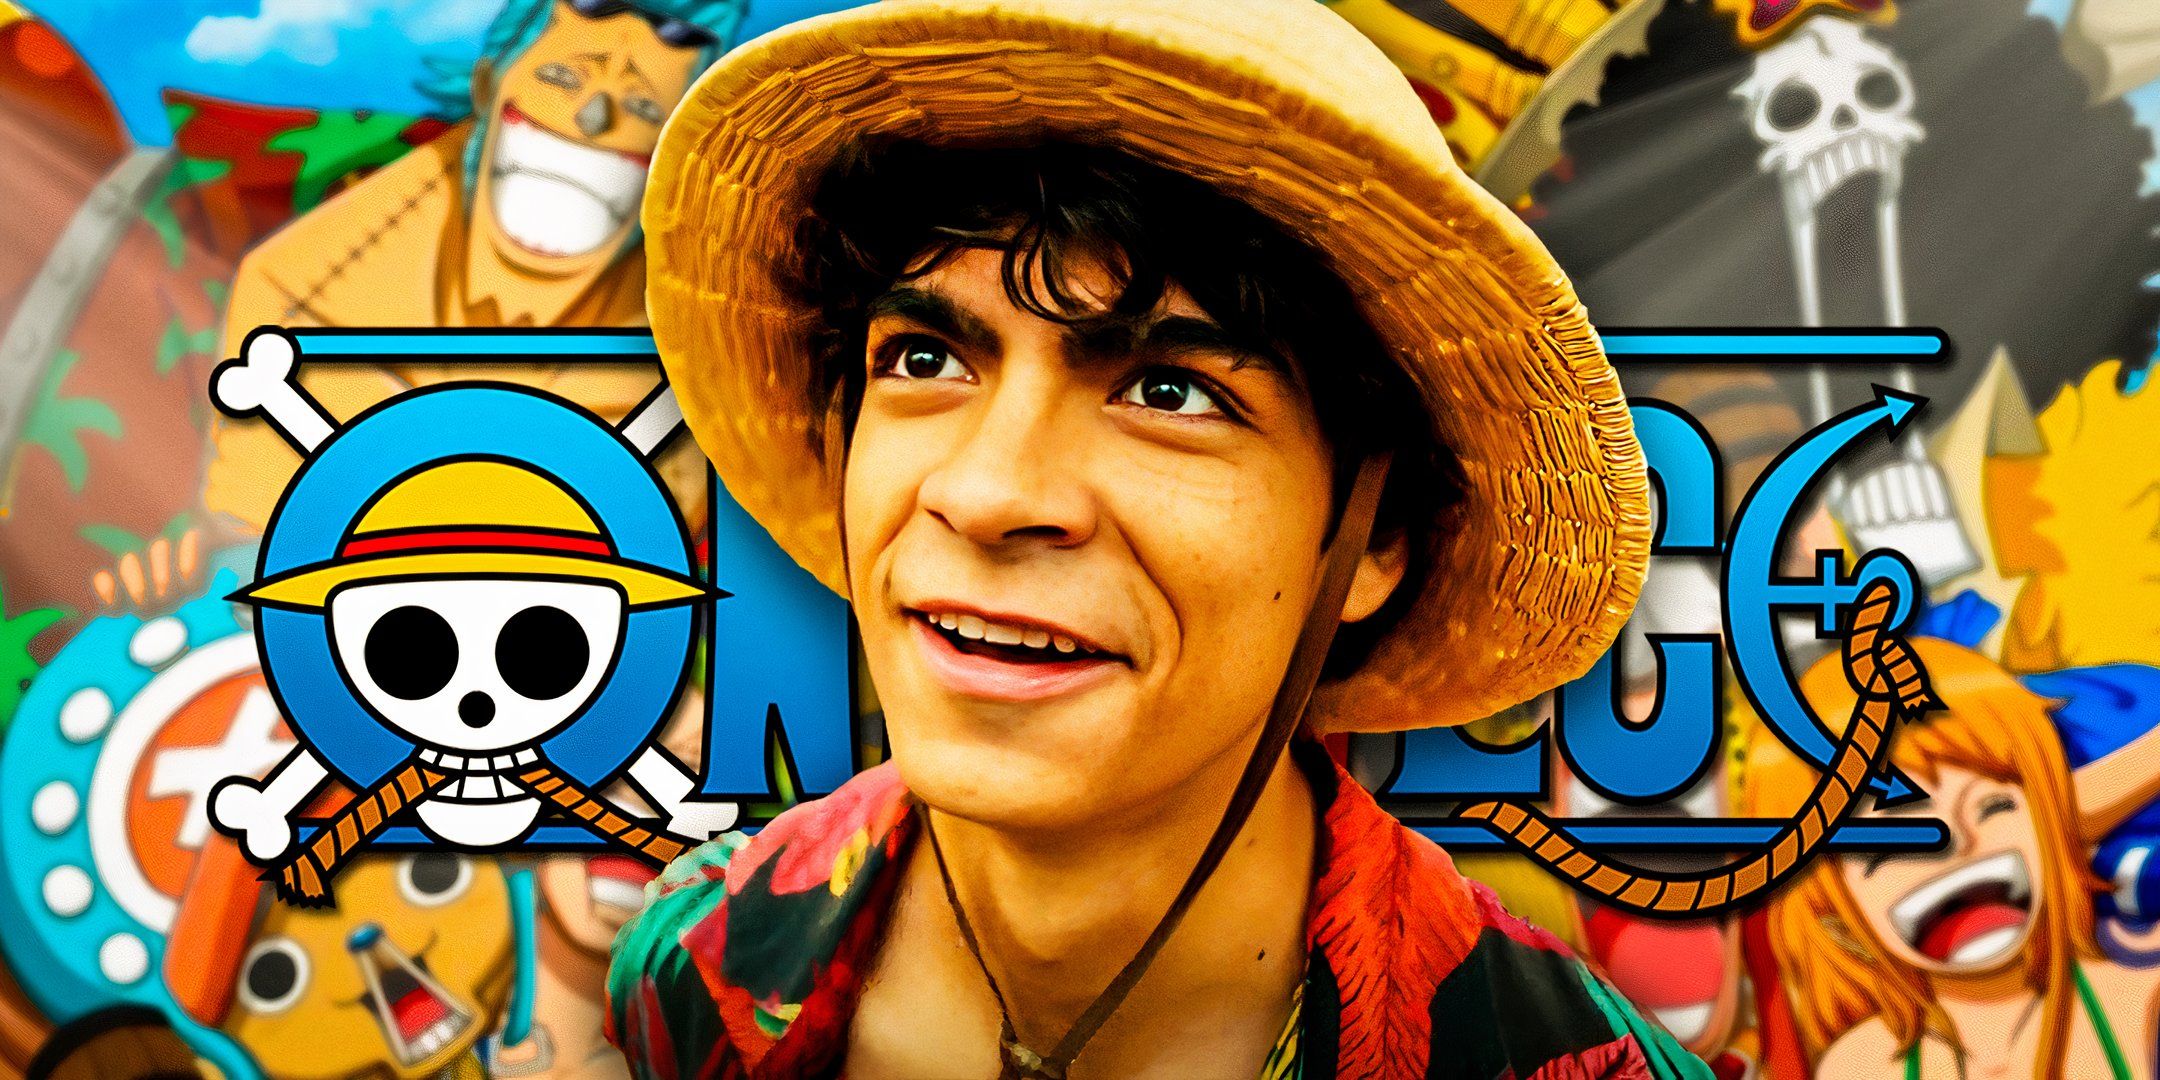 Inaki Godoy as Luffy in One Piece in front of the Netflix logo and anime crew.